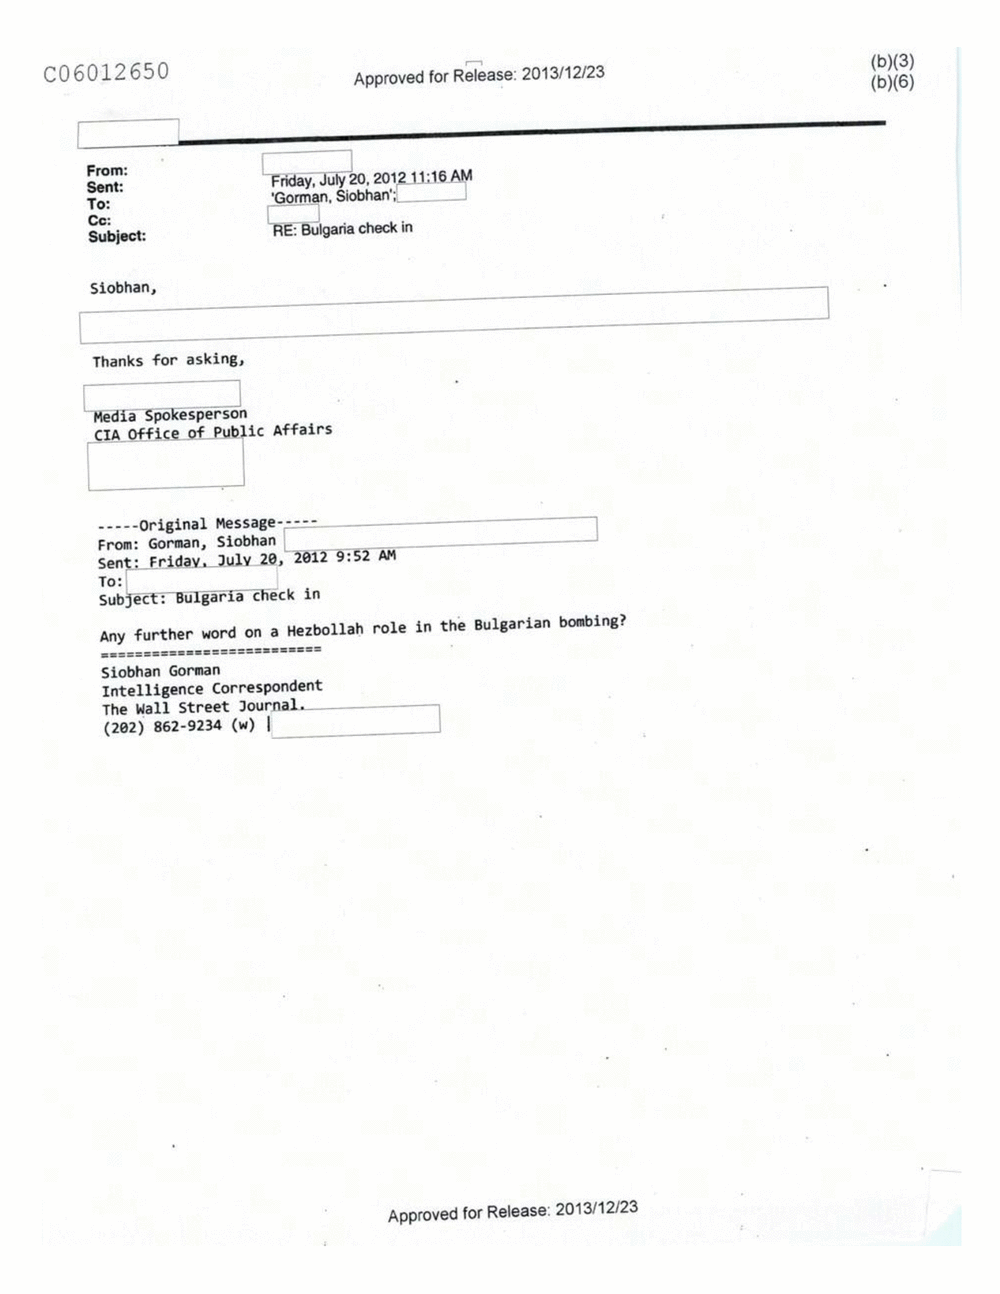 Page 224 from Email Correspondence Between Reporters and CIA Flacks